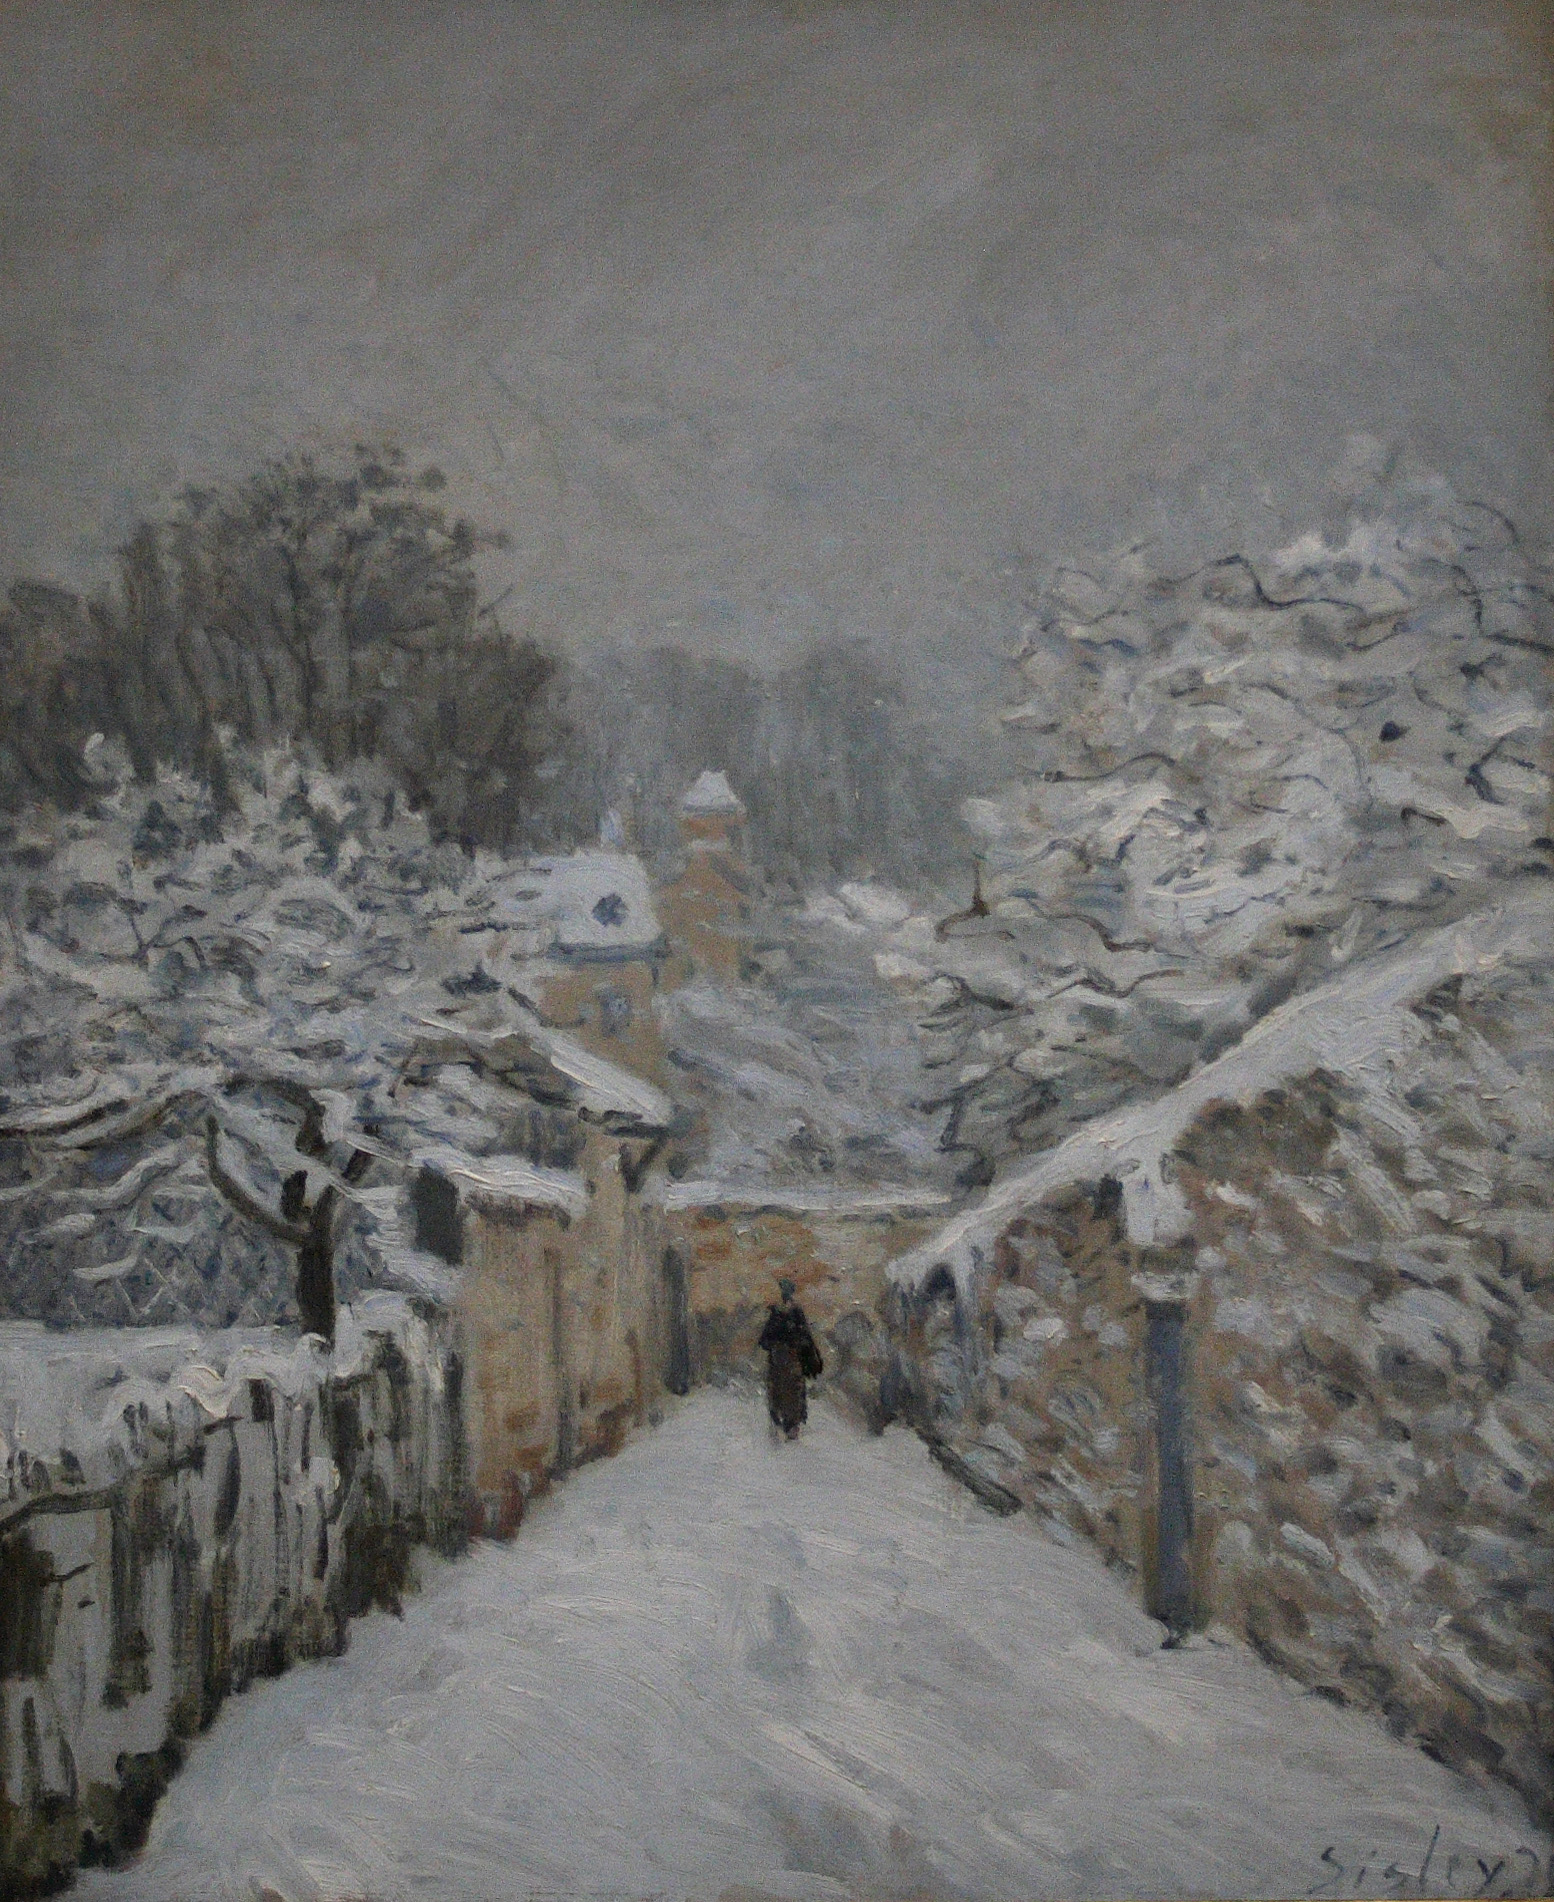 Snow at Louveciennes by Alfred Sisley - 1878 - 61 x 50.5 cm Musée d'Orsay